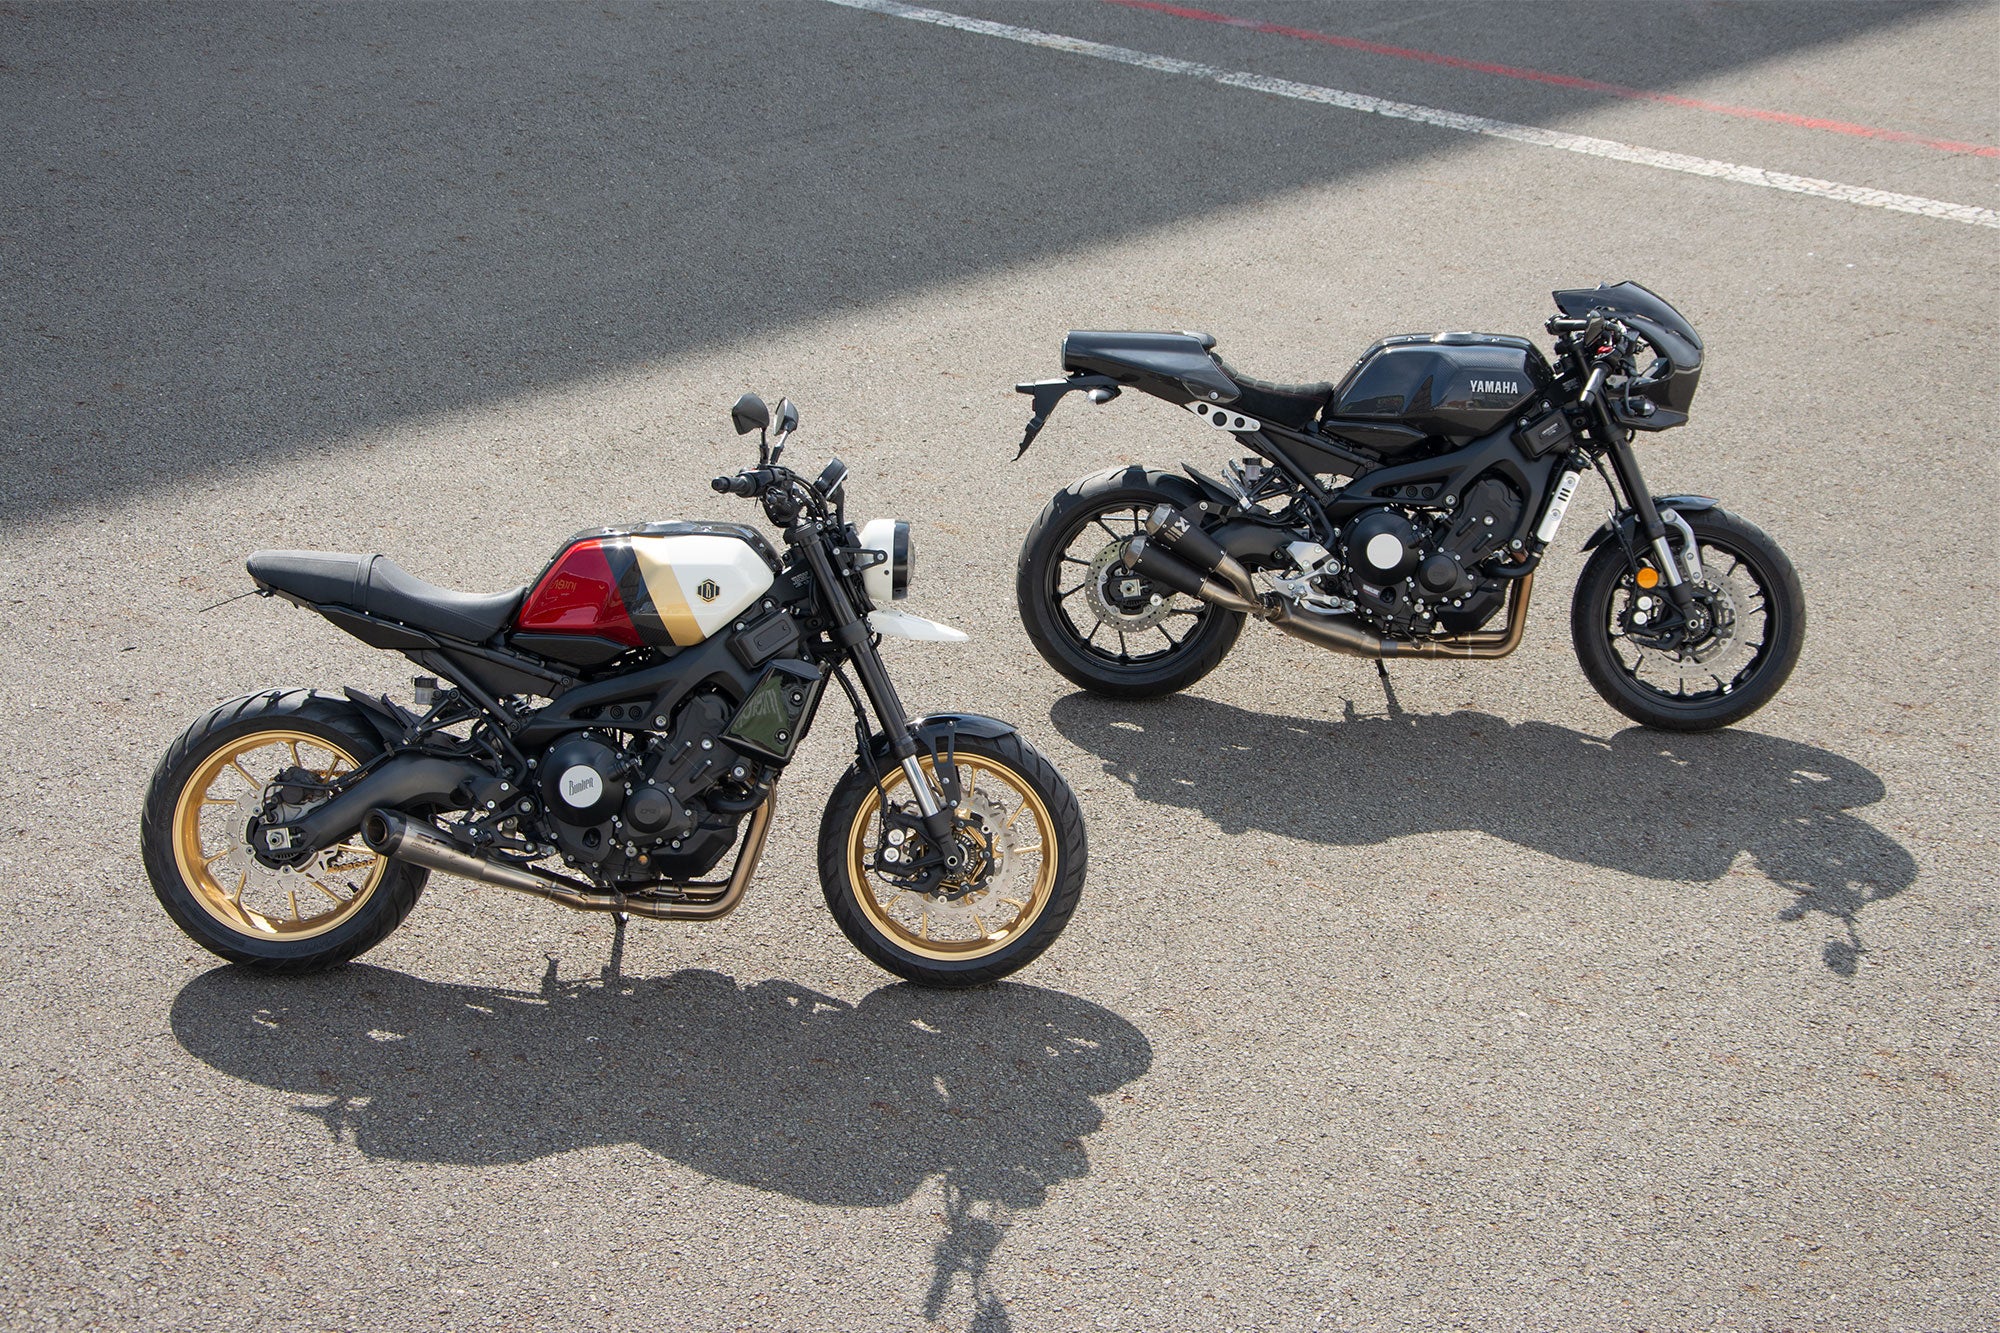 Yamaha xsr900 abarth version and Chimera version side by side